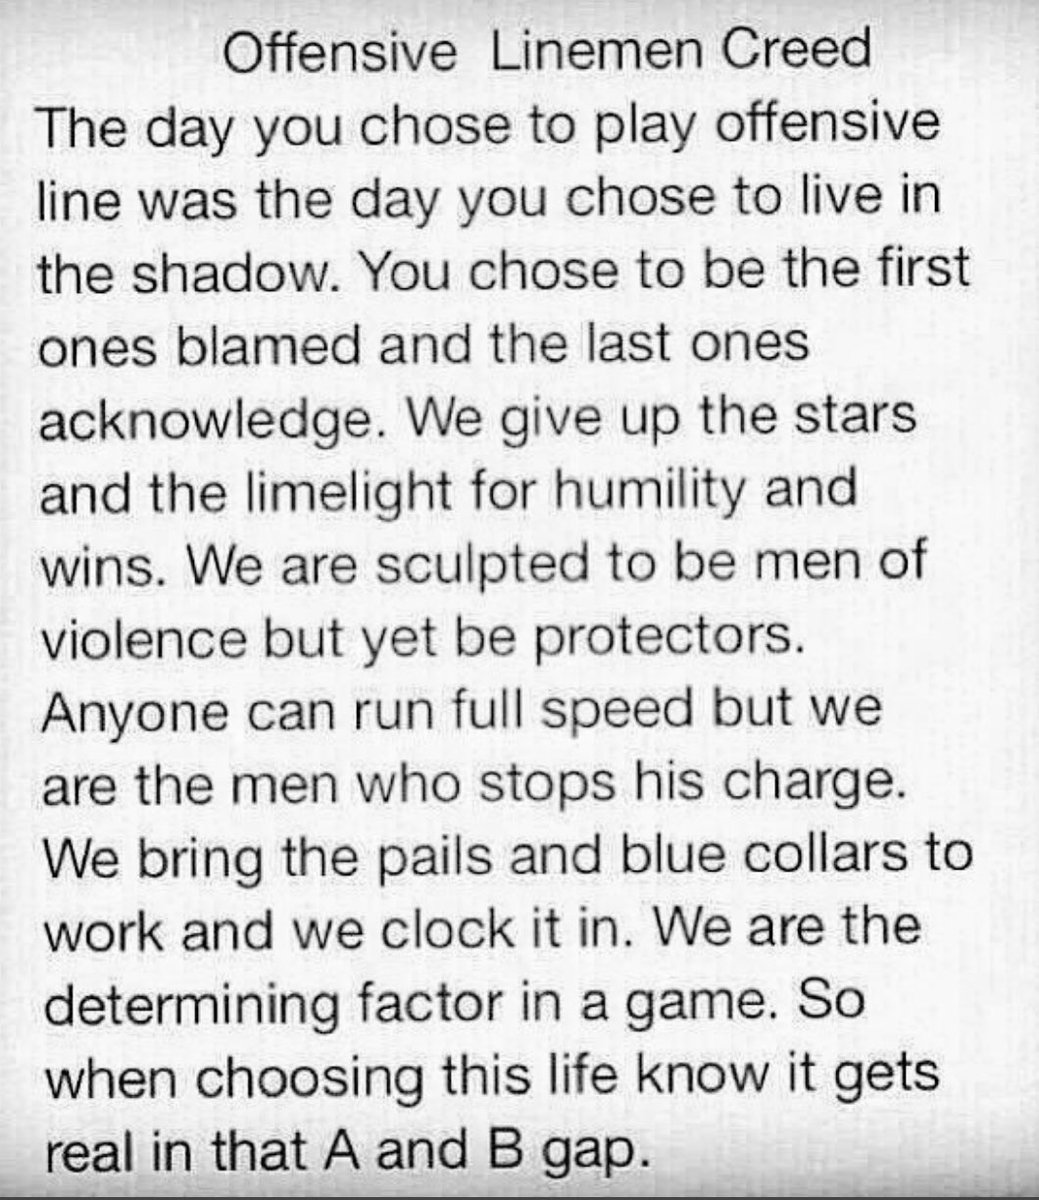 Tweet credit: @CoachHenning75 OFFENSIVE LINE CREED